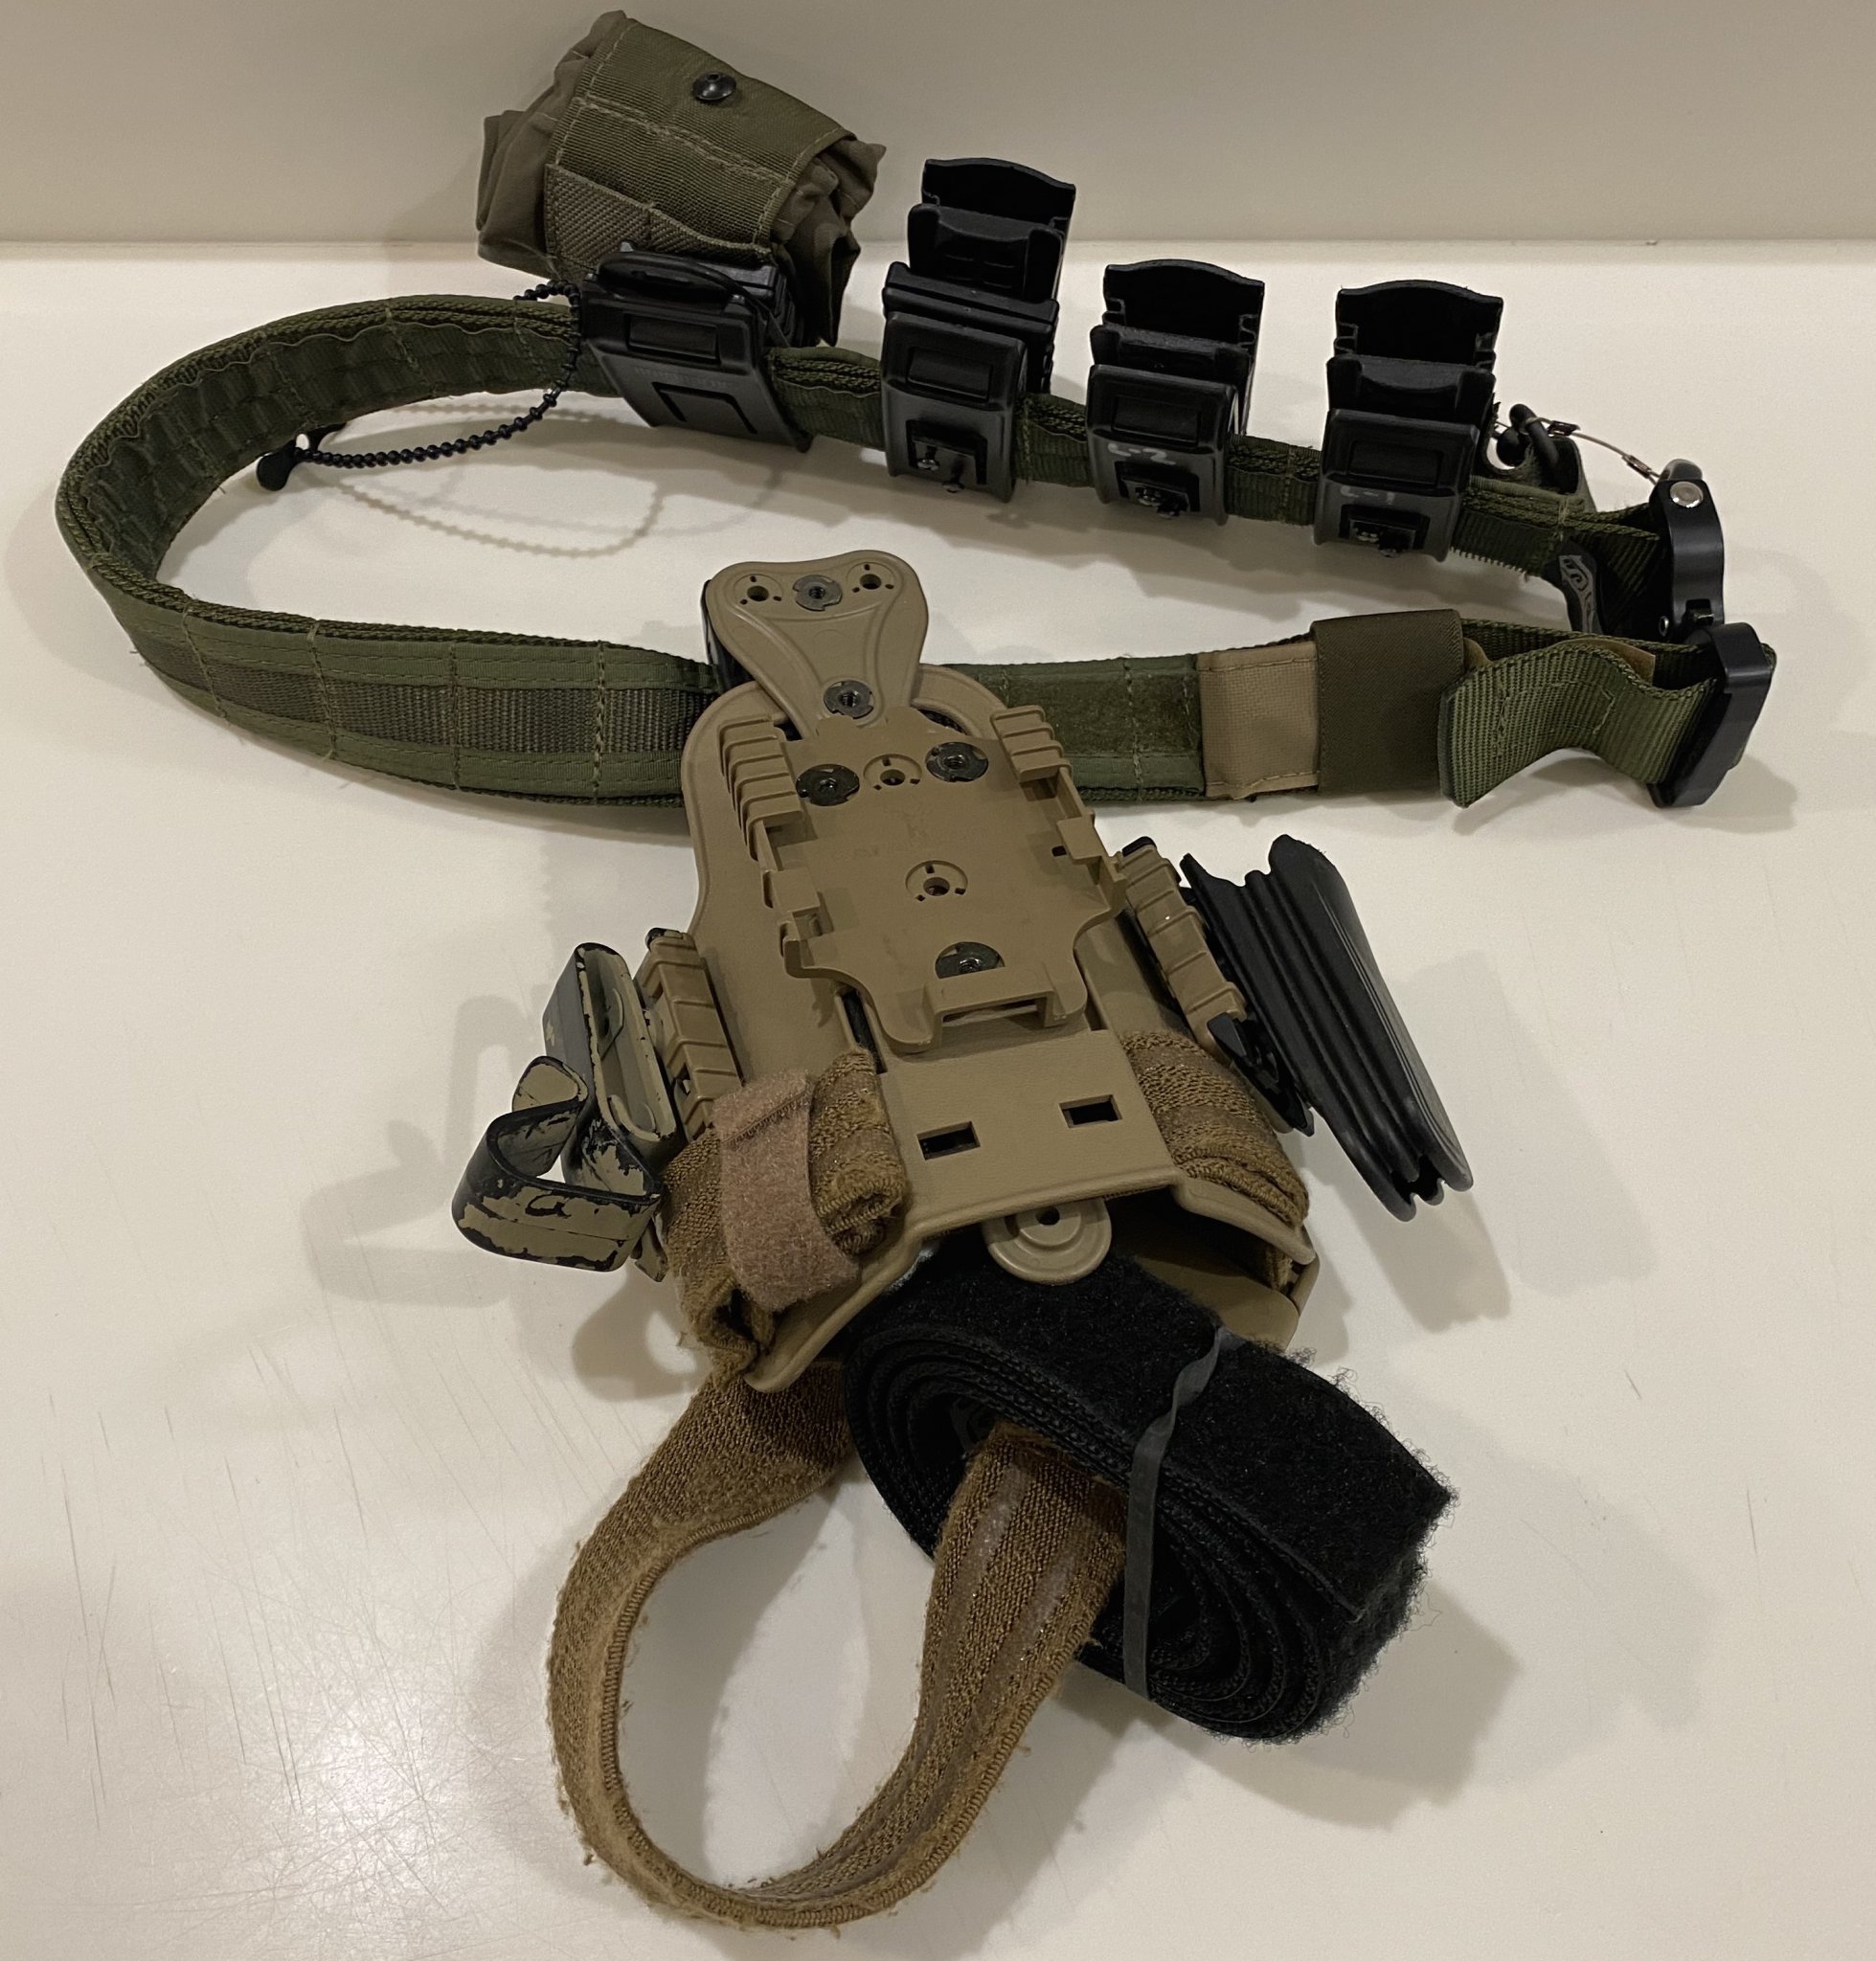 Wilder Tactical Modified UBL Mid Ride Leg Strap w/ QLS Receiver